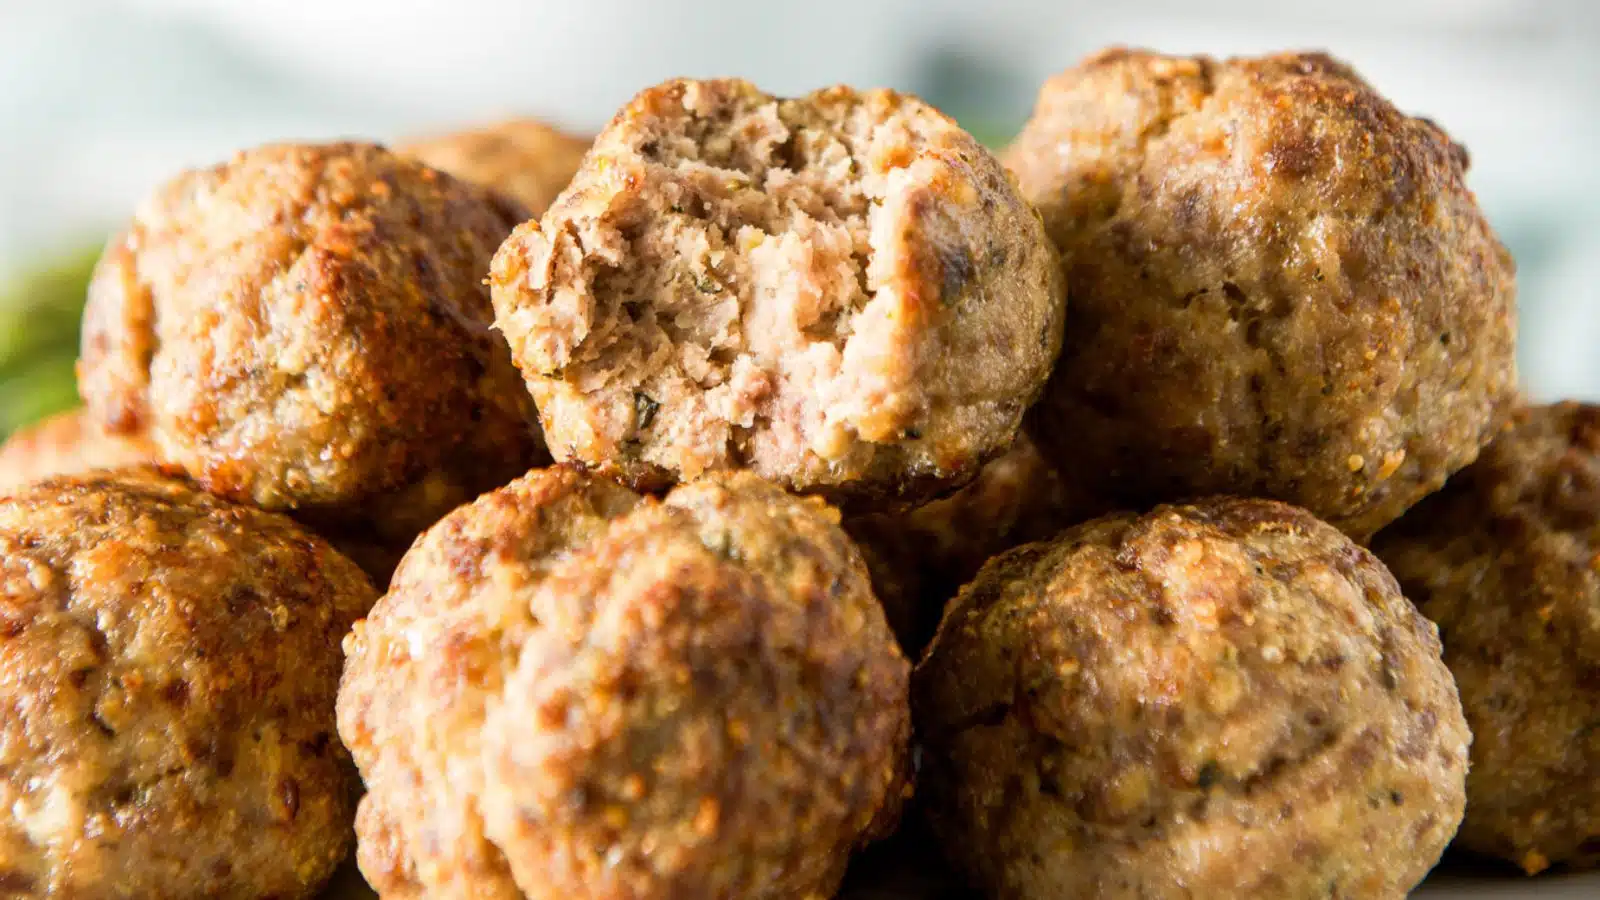 Closeup of meatballs stacked on each other with a bite taken out of one